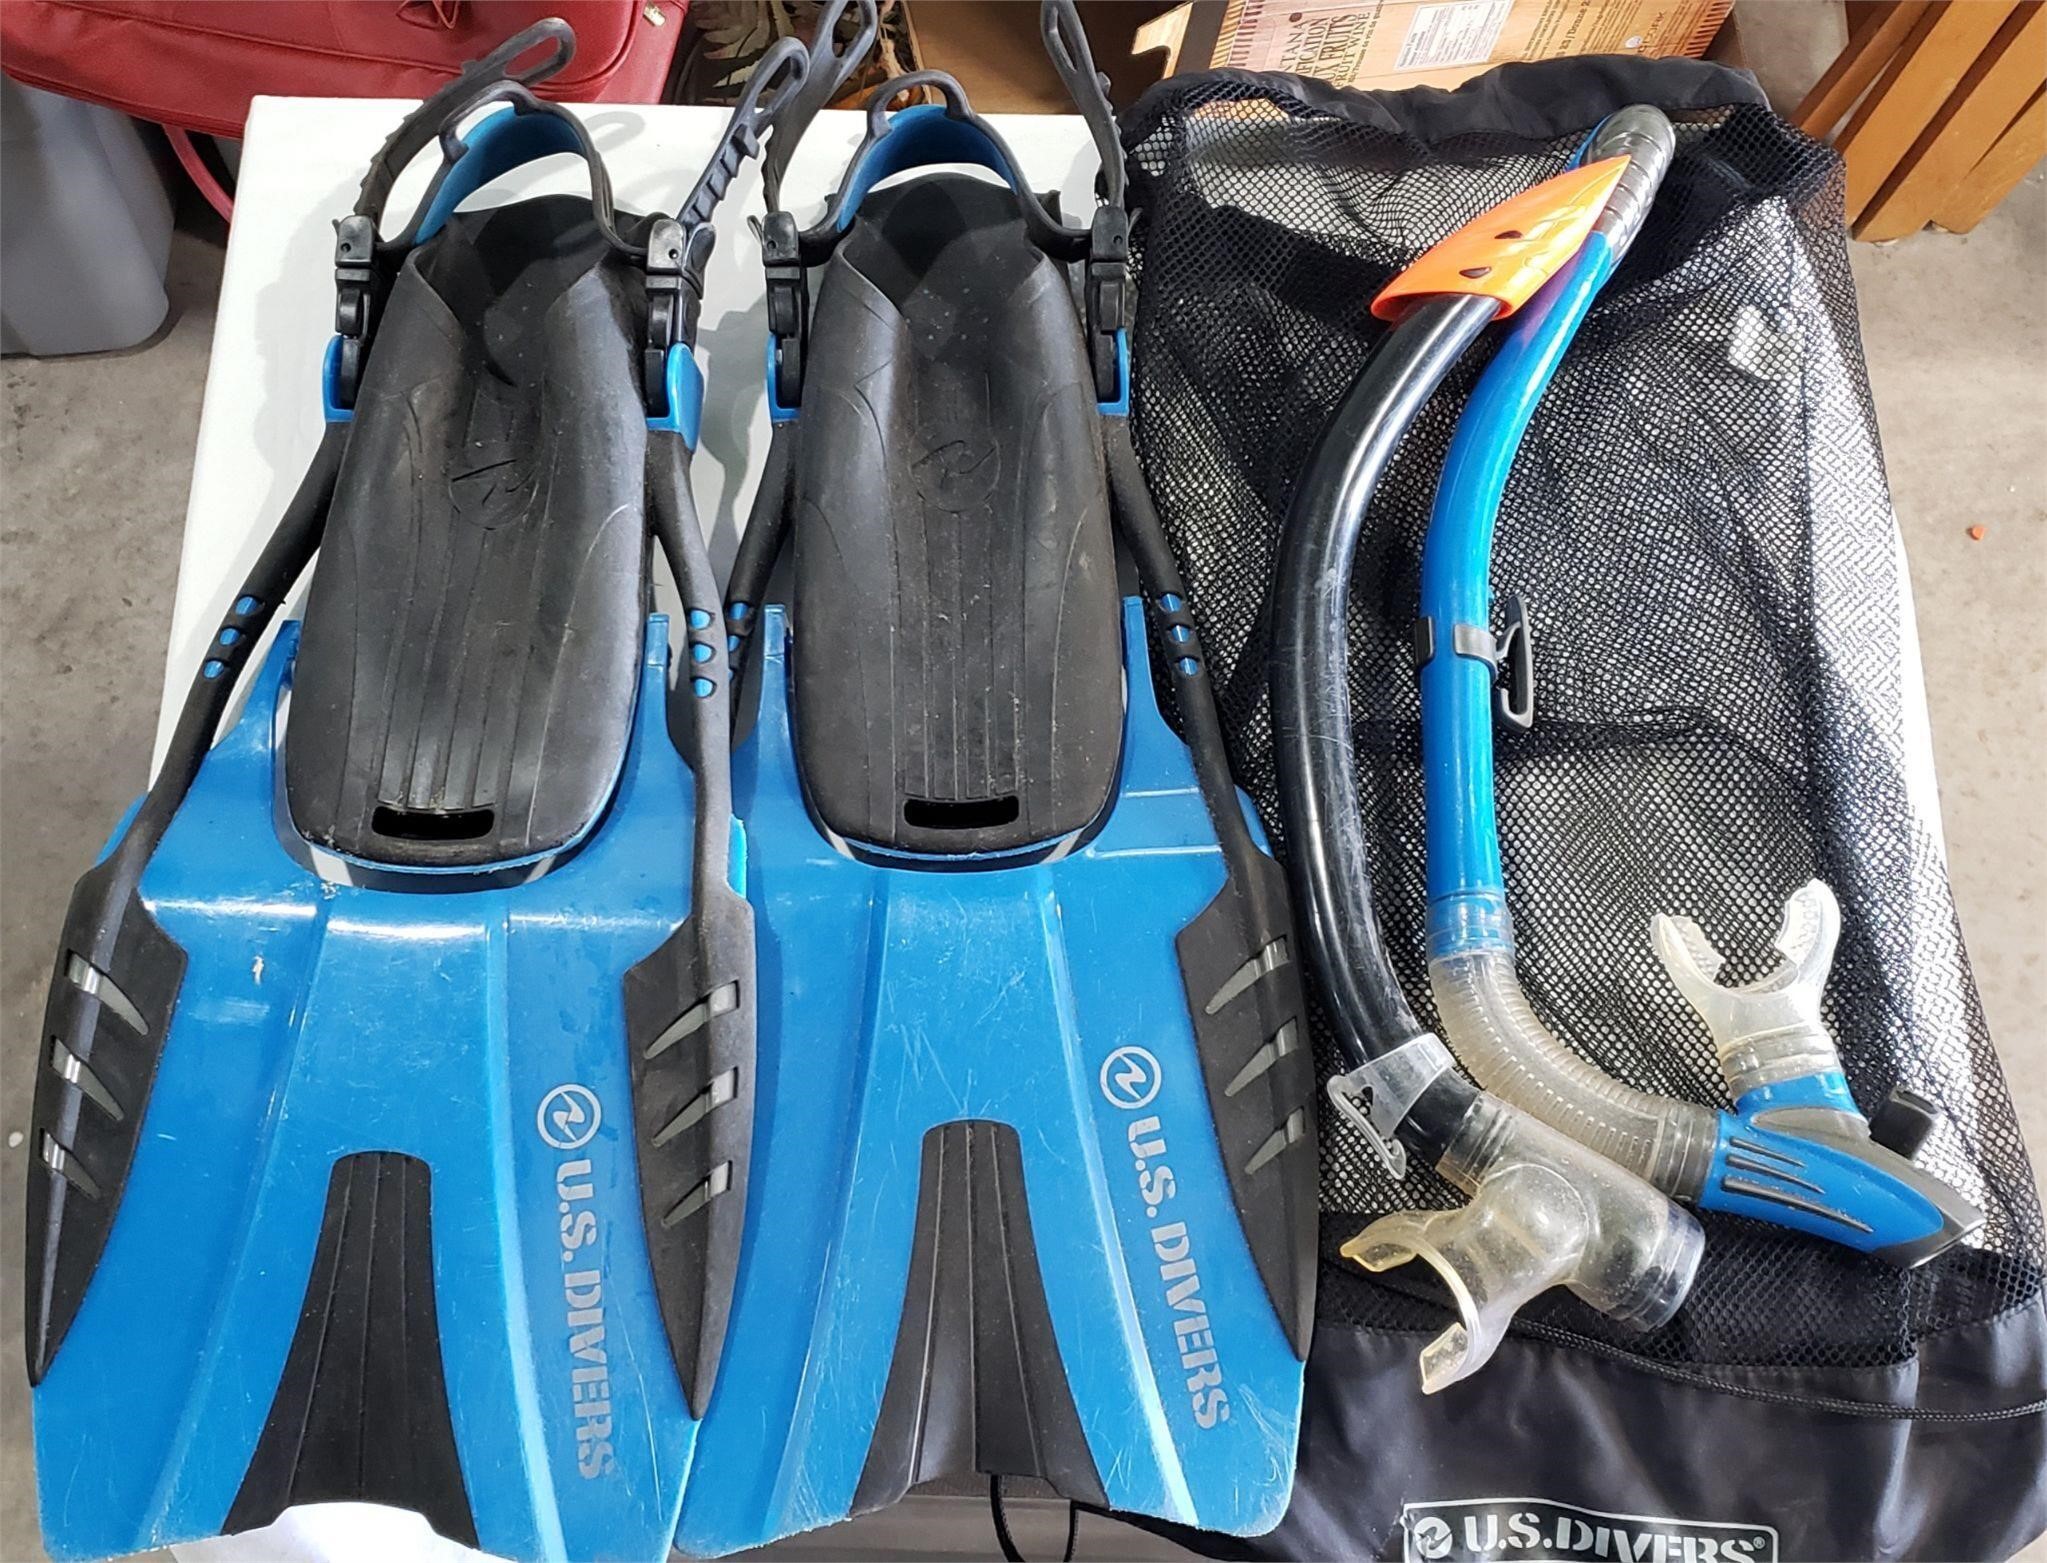 Snorkels and Flippers in Bag-US Divers Brand-L/XL